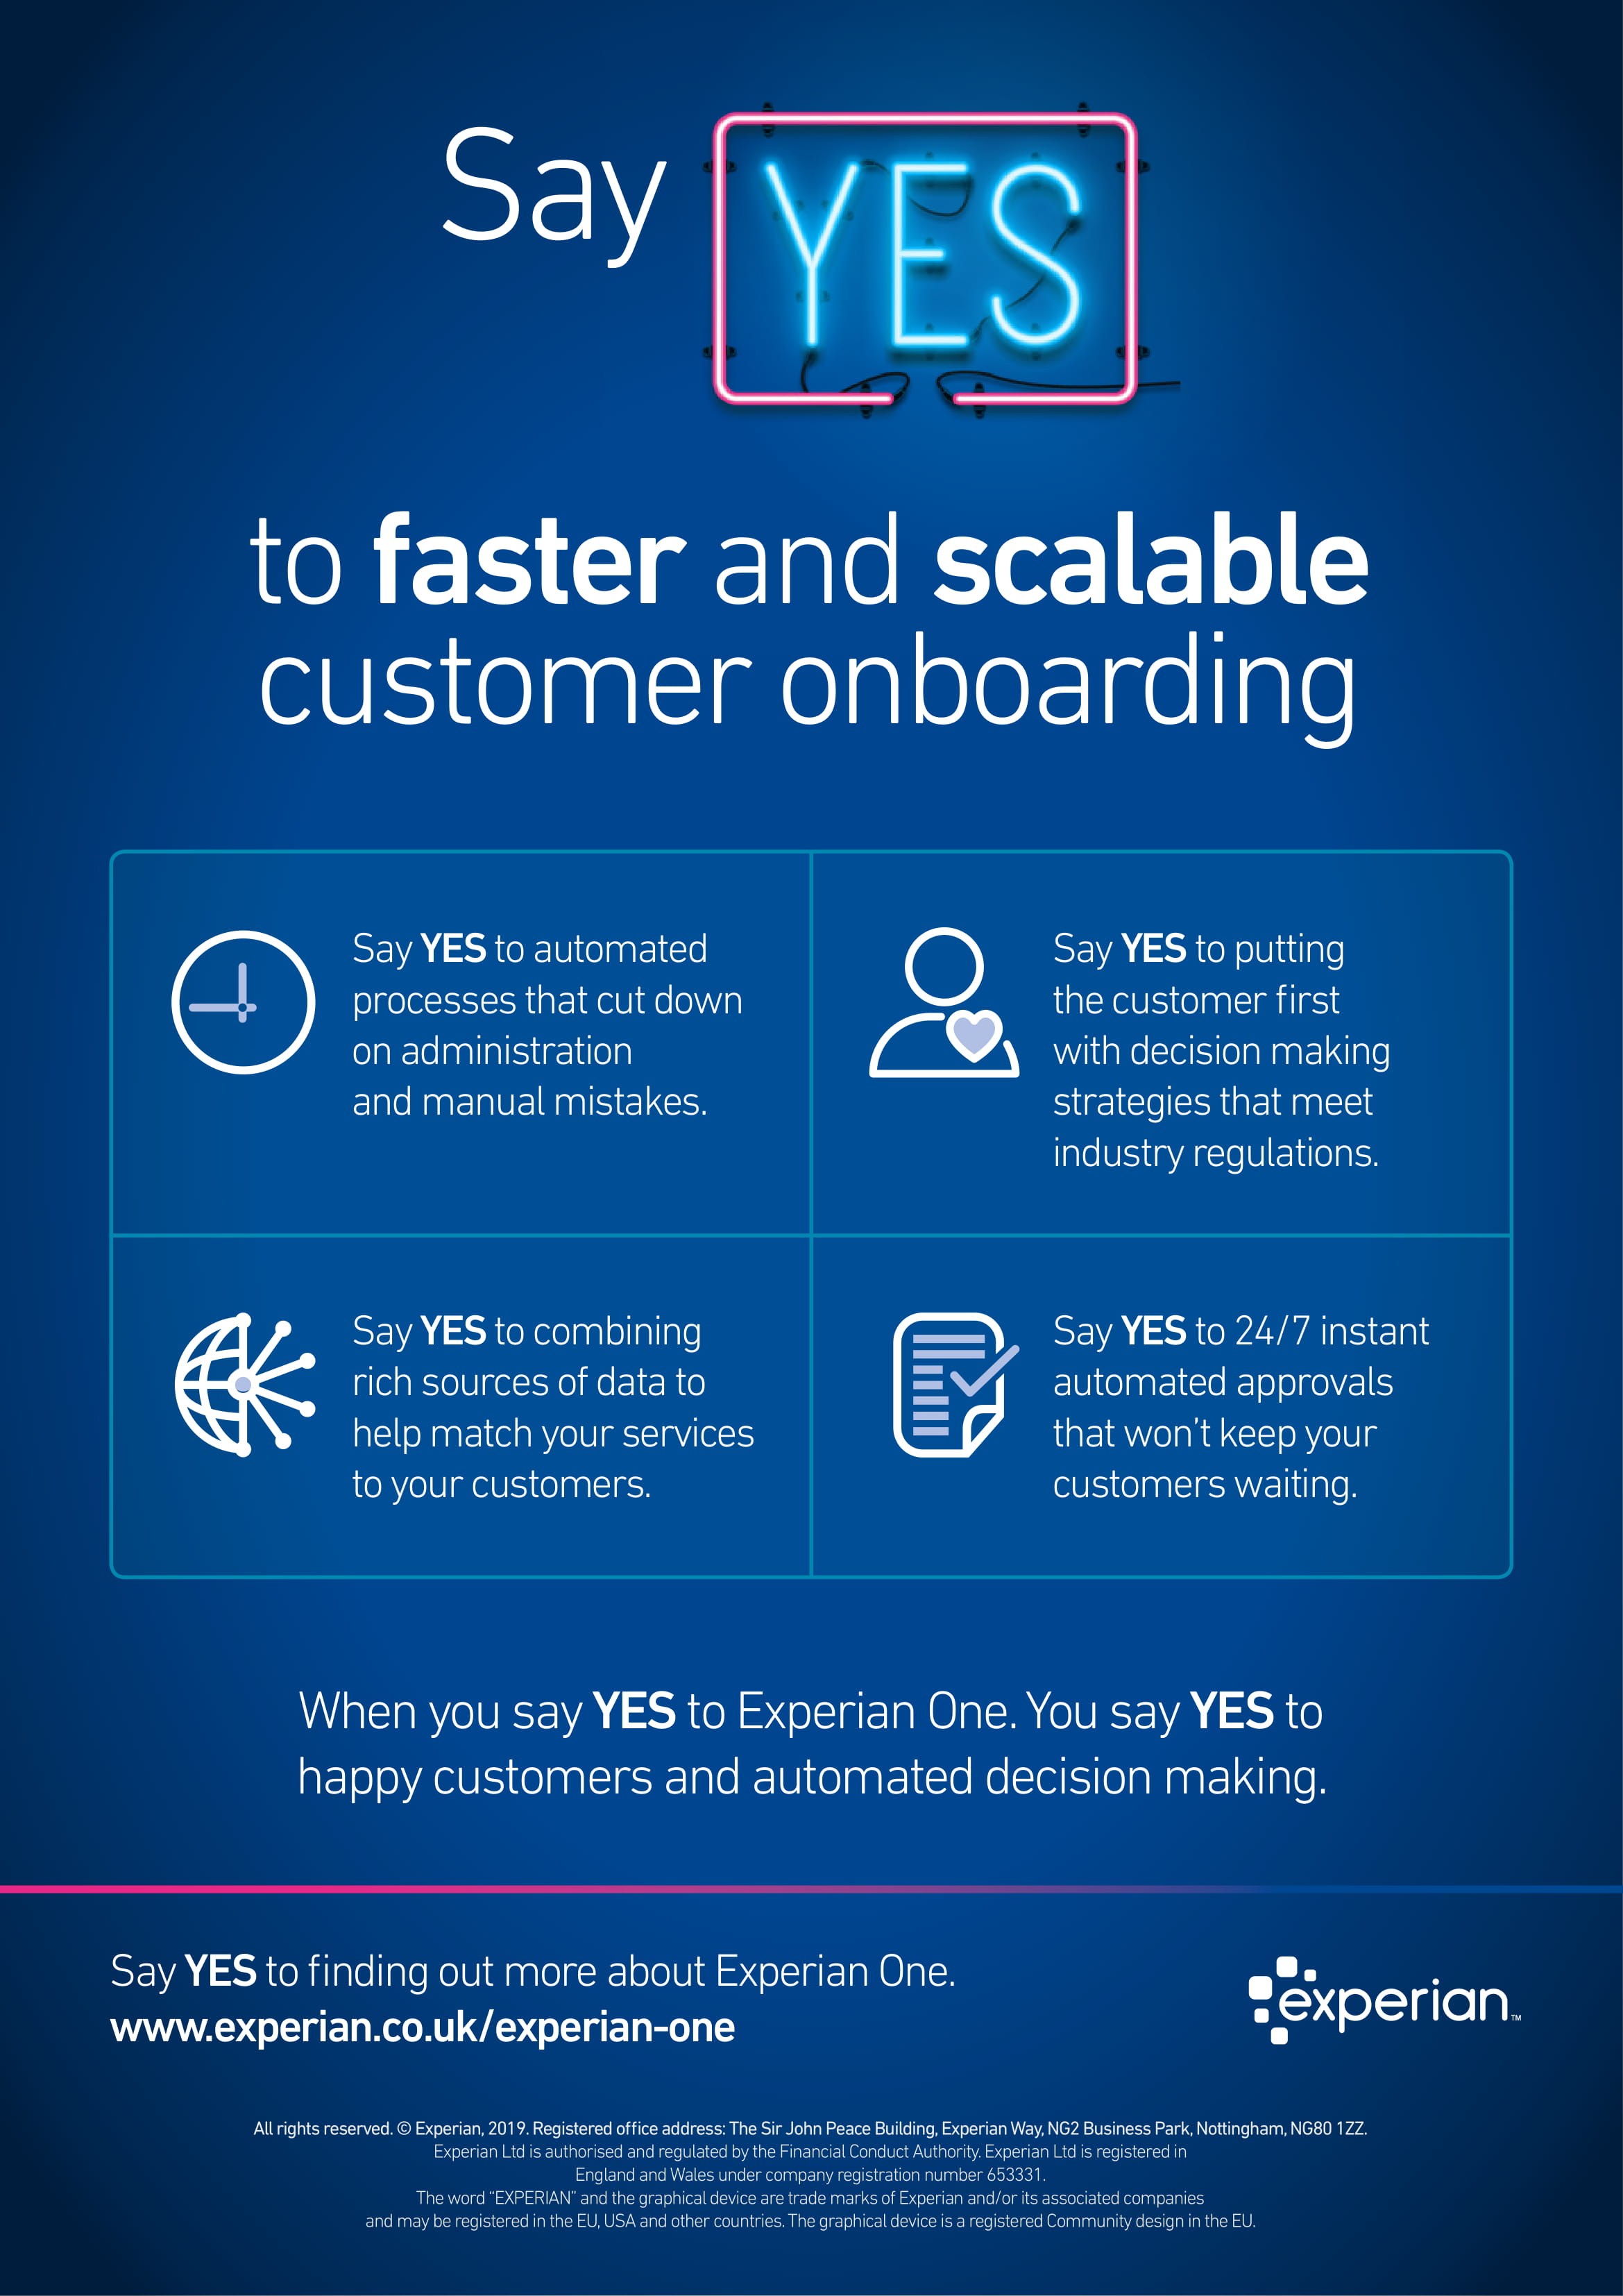 Say YES to a faster customer onboarding process